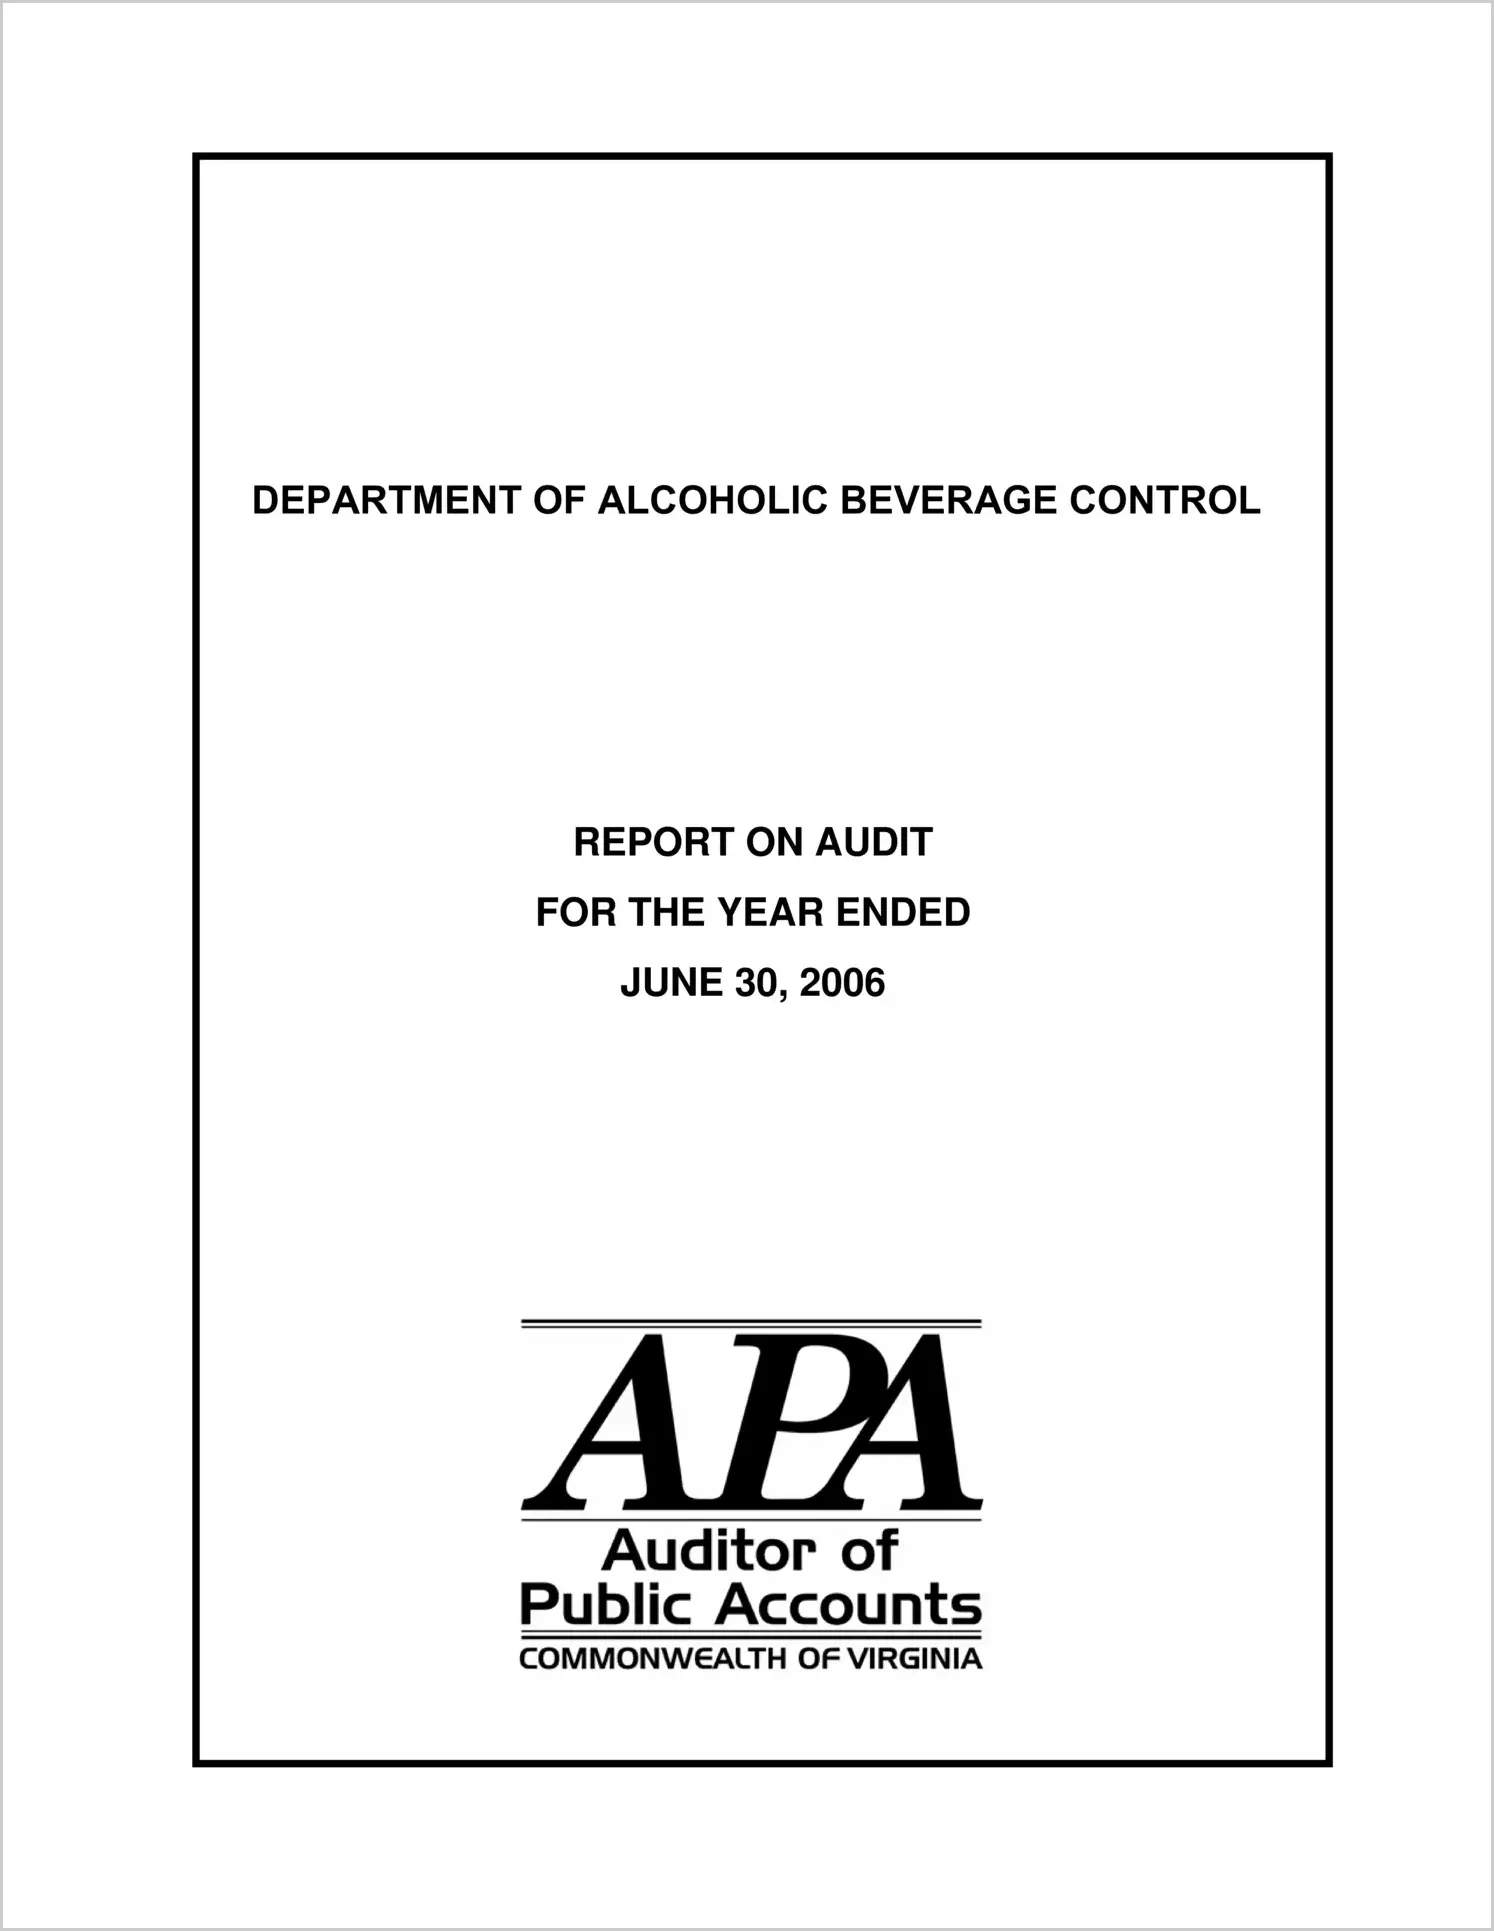 Department of Alcoholic Beverage Control for the year ended June 30, 2006